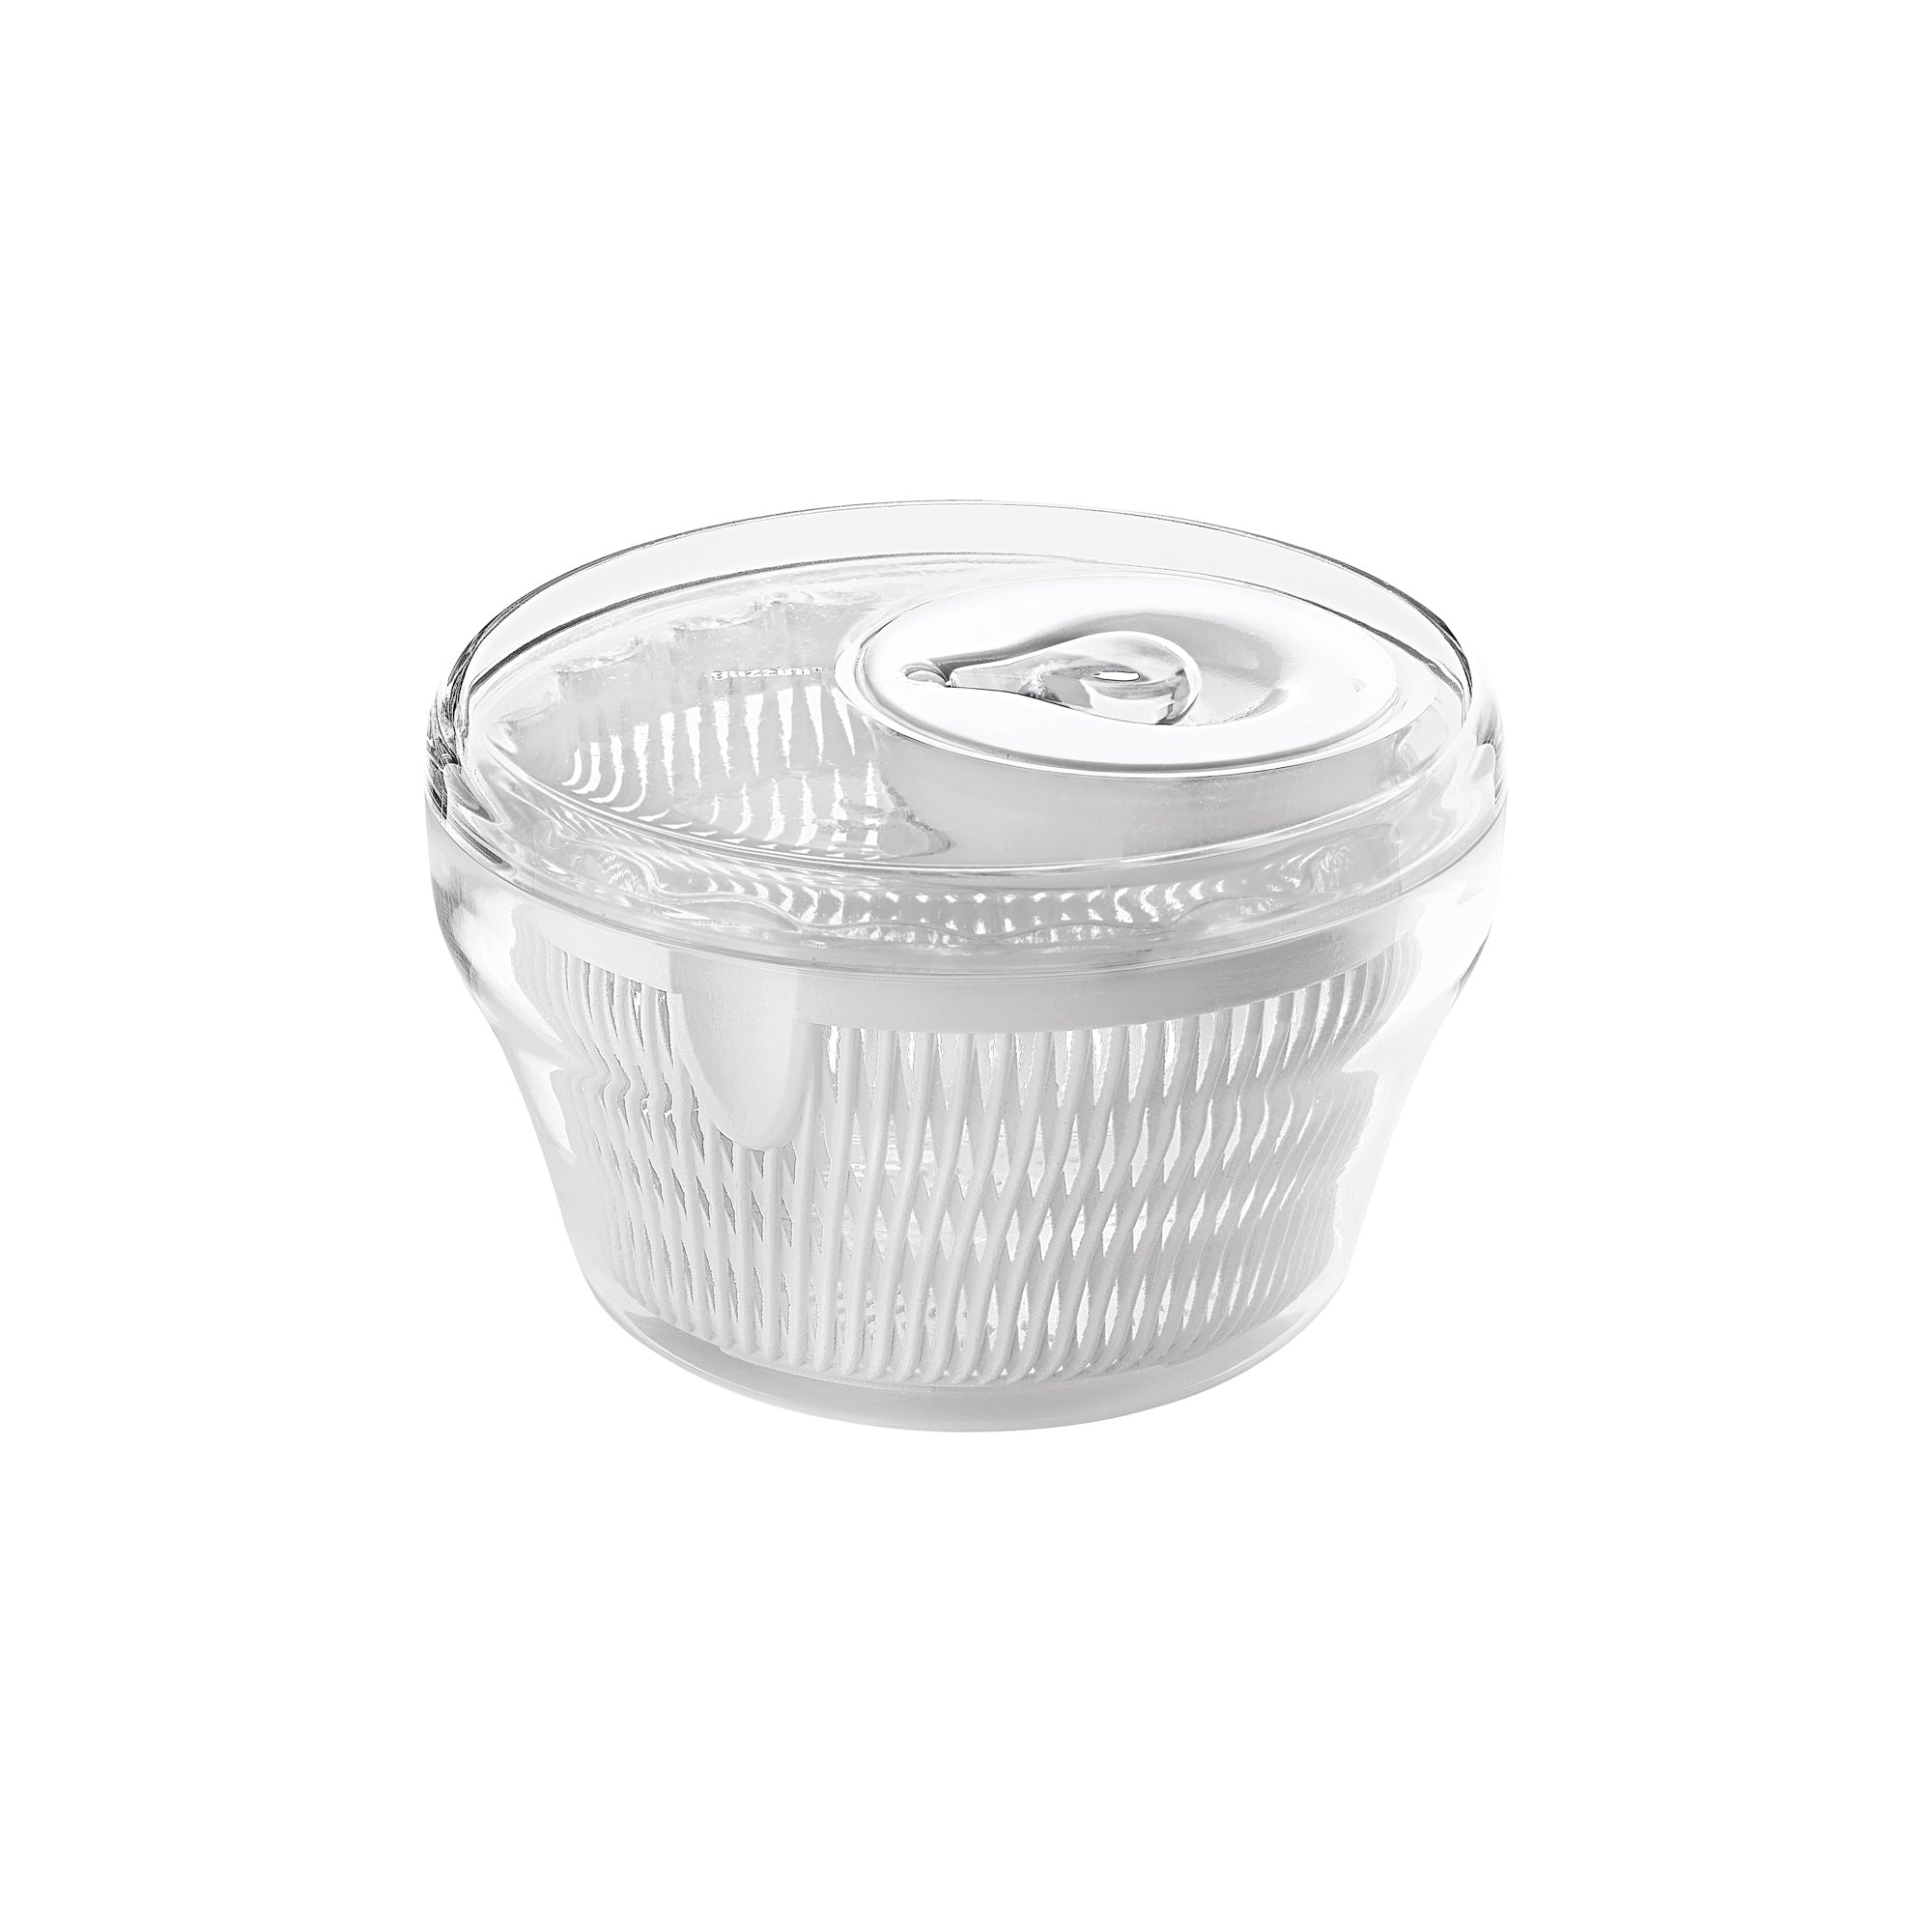 SALAD SPINNER 'PERFECT DRY' "PREPARATION"